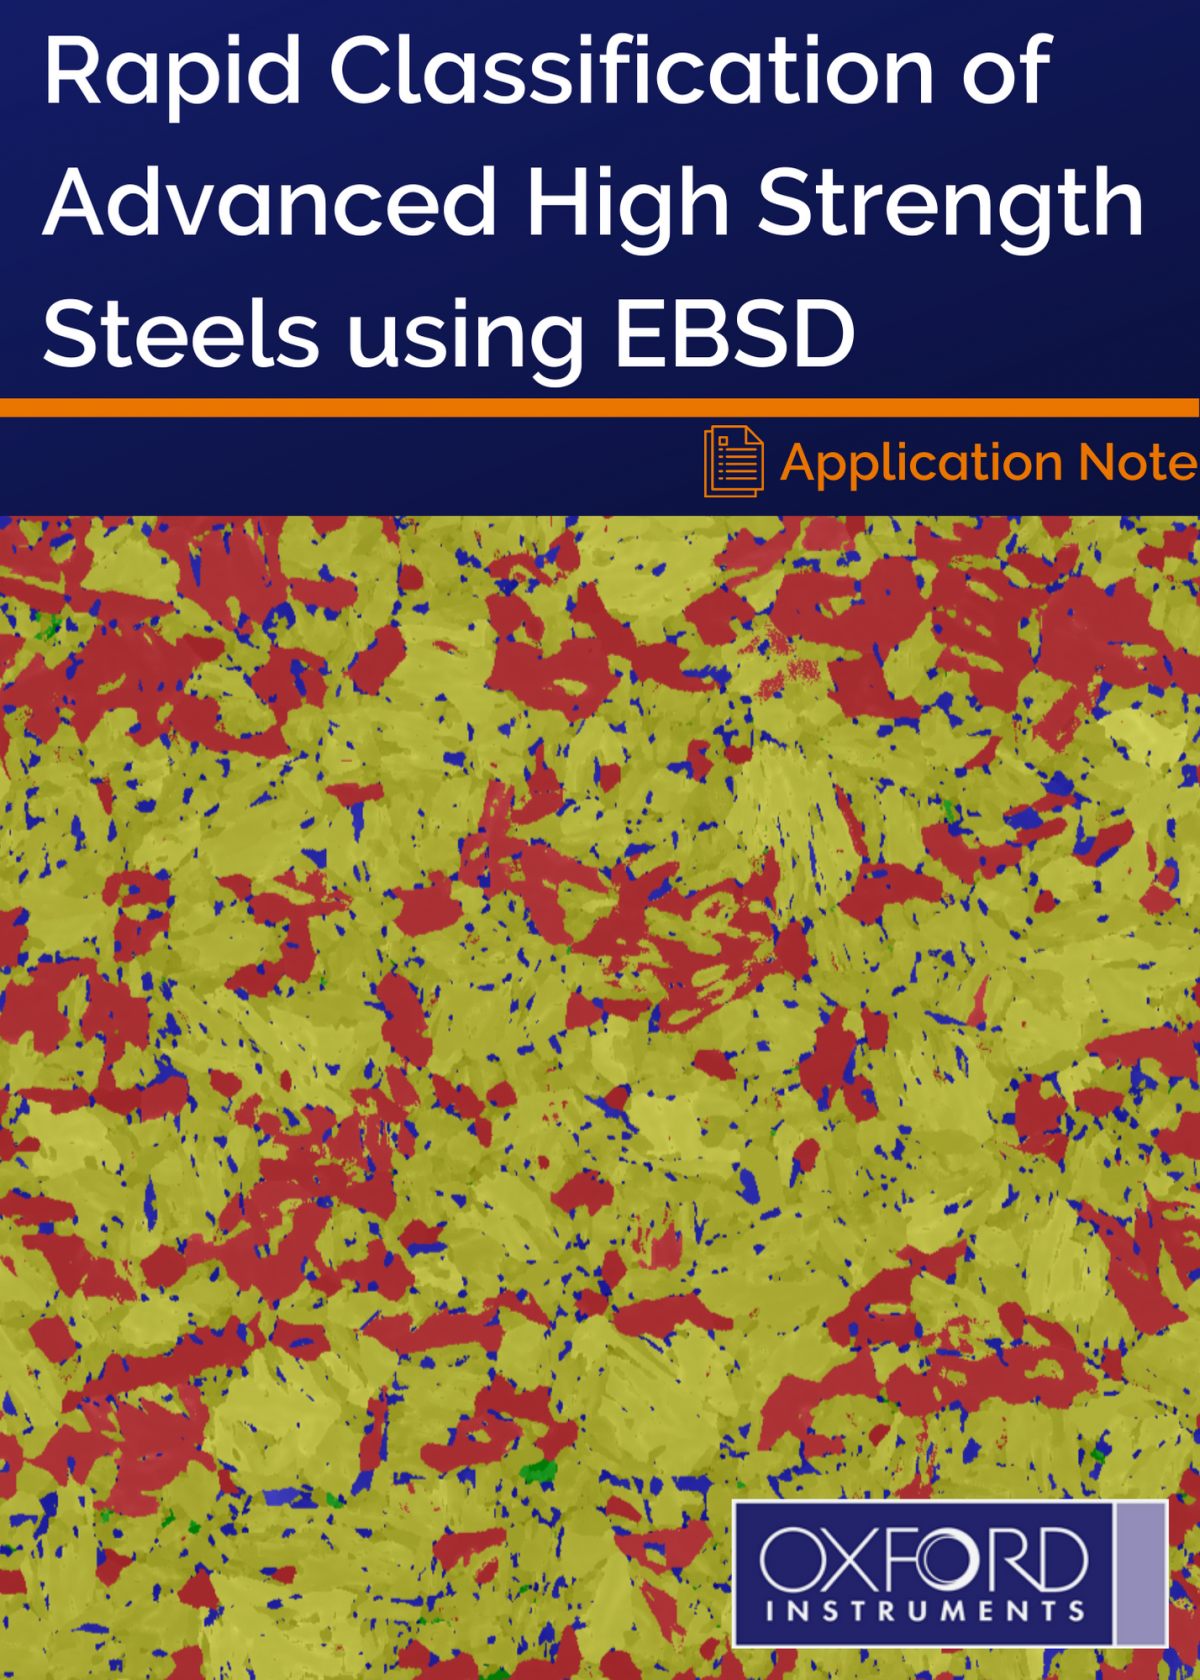 Rapid Classification of Advanced High Strength Steels using EBSD